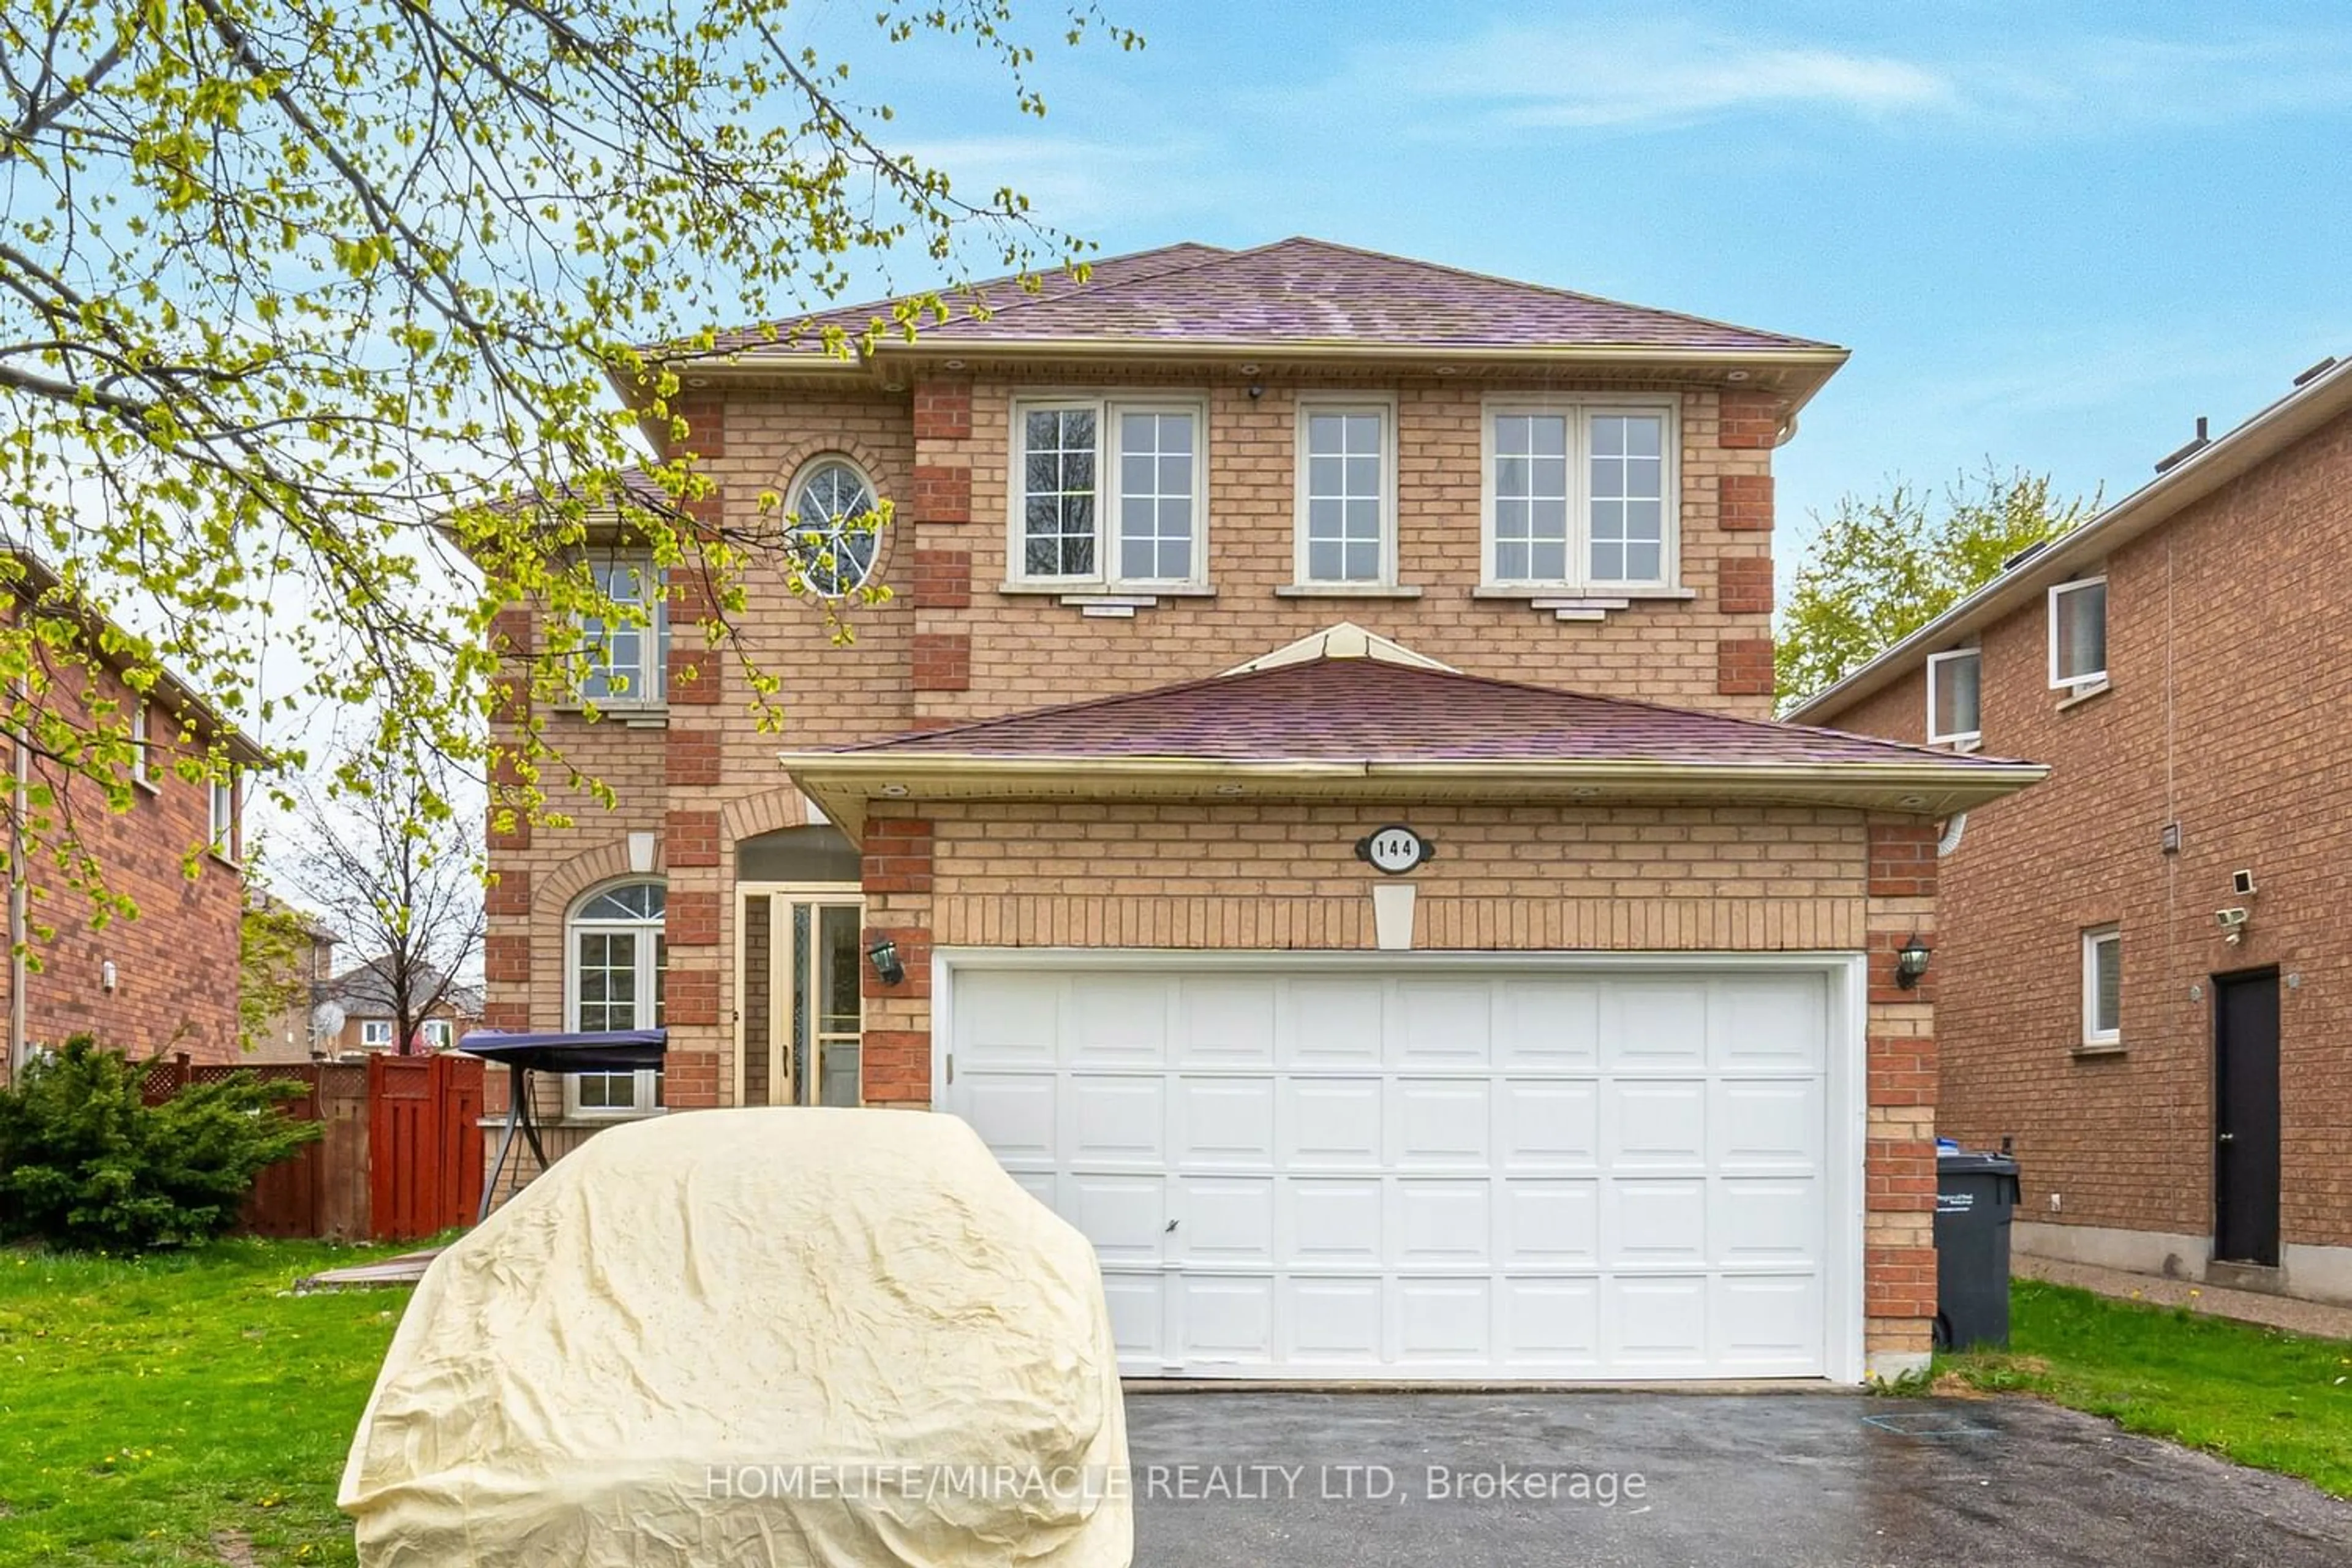 Home with brick exterior material for 144 Lockwood Rd, Brampton Ontario L6Y 4Z2